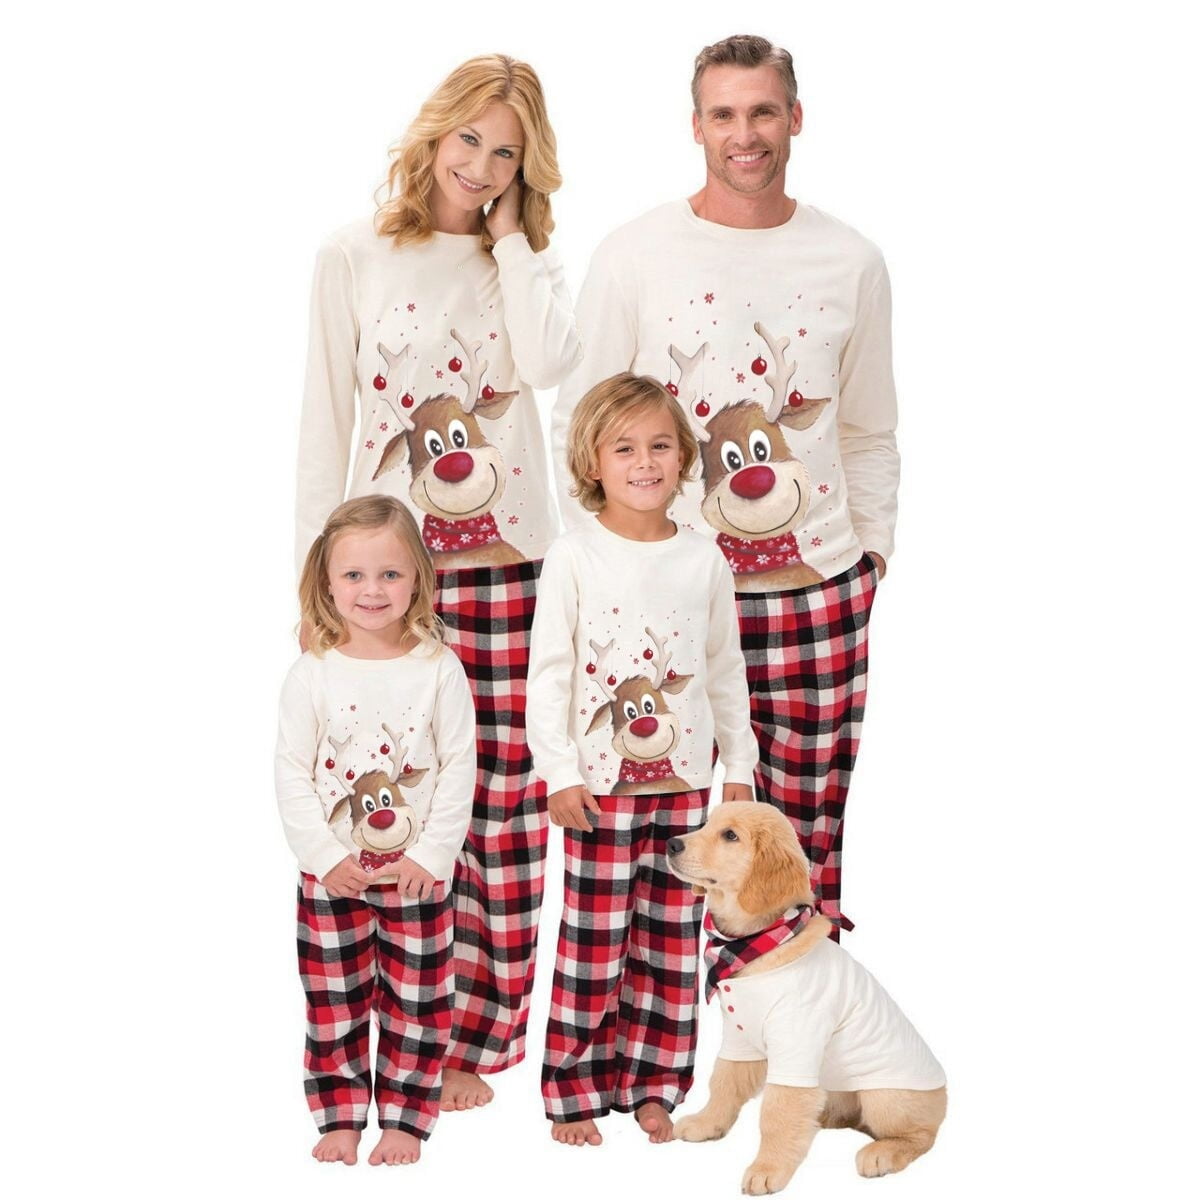 Family Christmas Pjs Matching Sets Baby Christmas Matching Jammies for Adults and Kids Holiday Xmas Sleepwear Set 